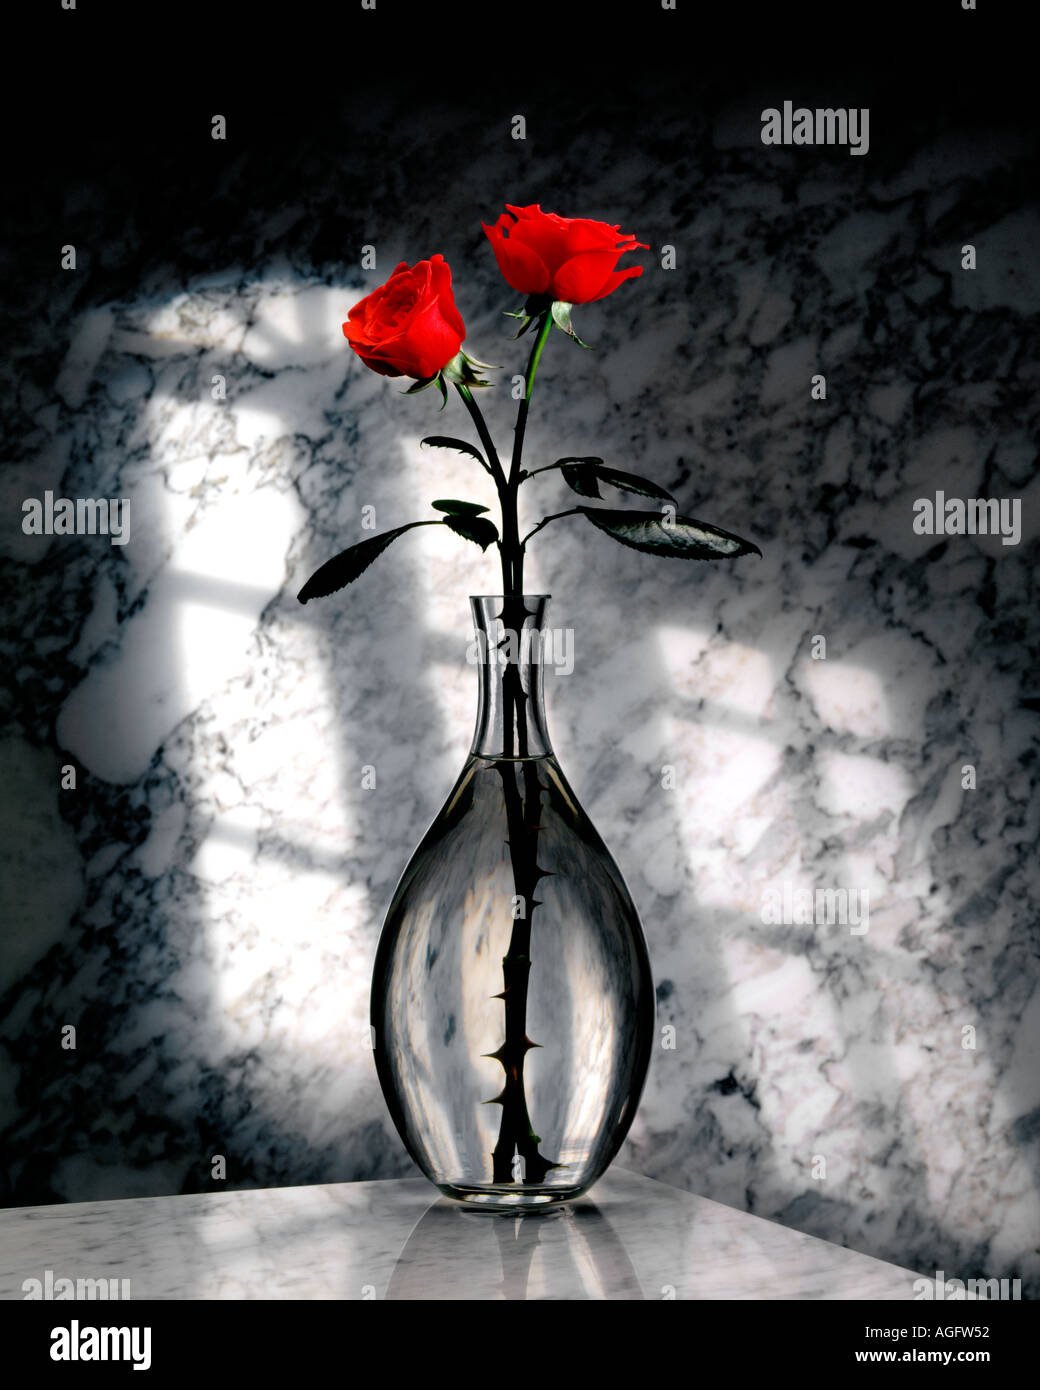 Two Red Roses in a glass vase on a marble background 2 roses Stock Photo